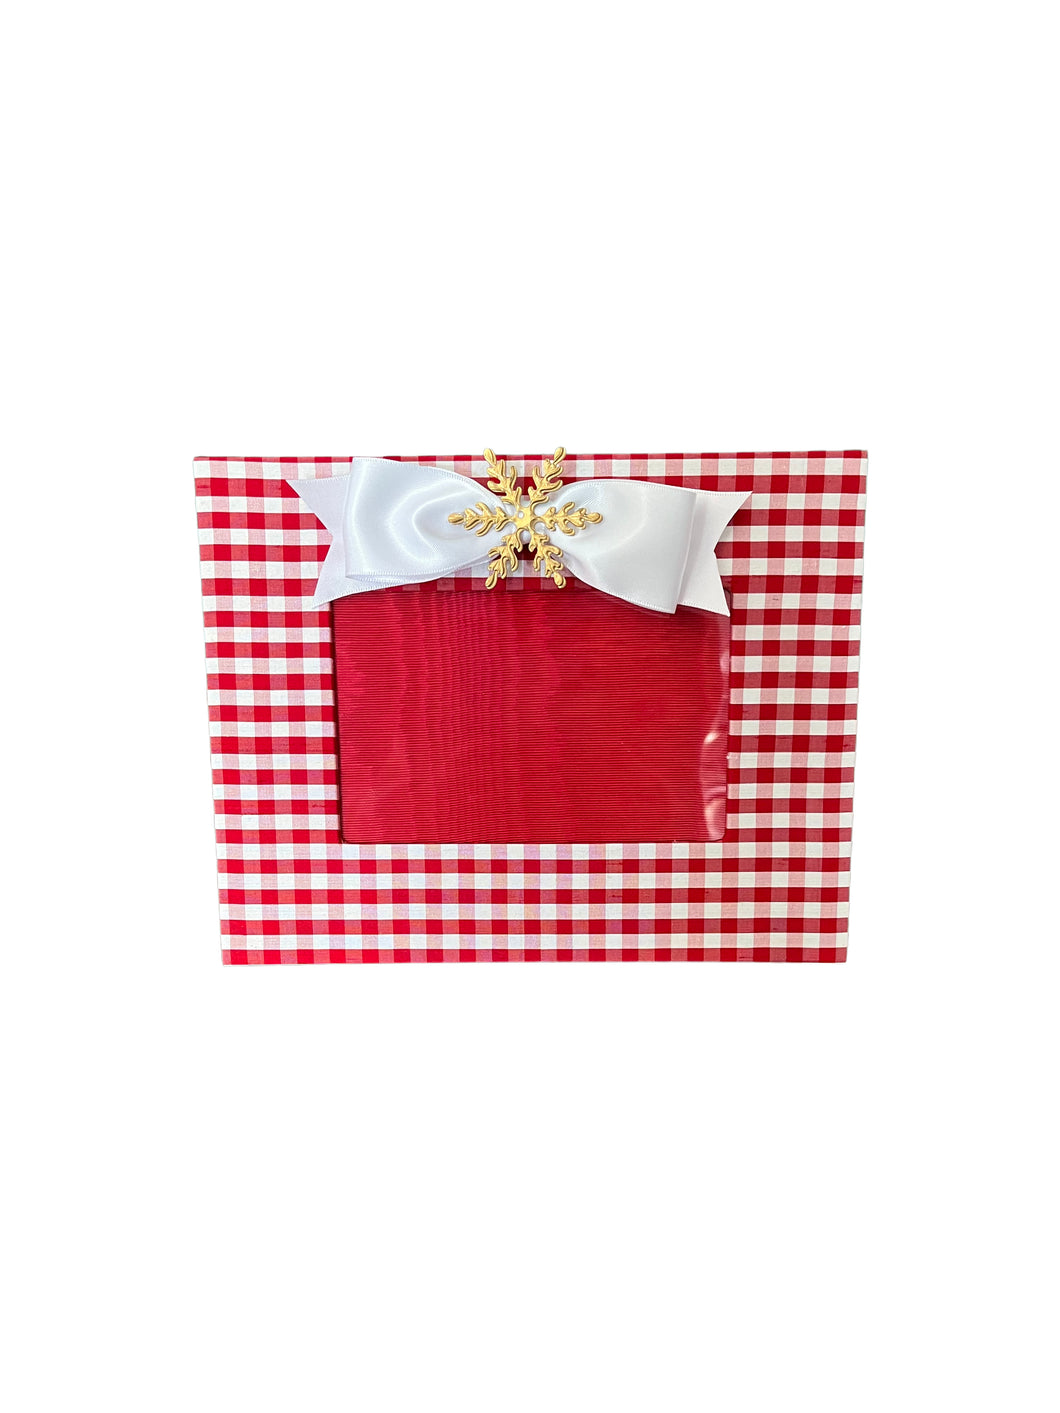 Red Check Silk Frame with White Bow & Snowflake, 5x7